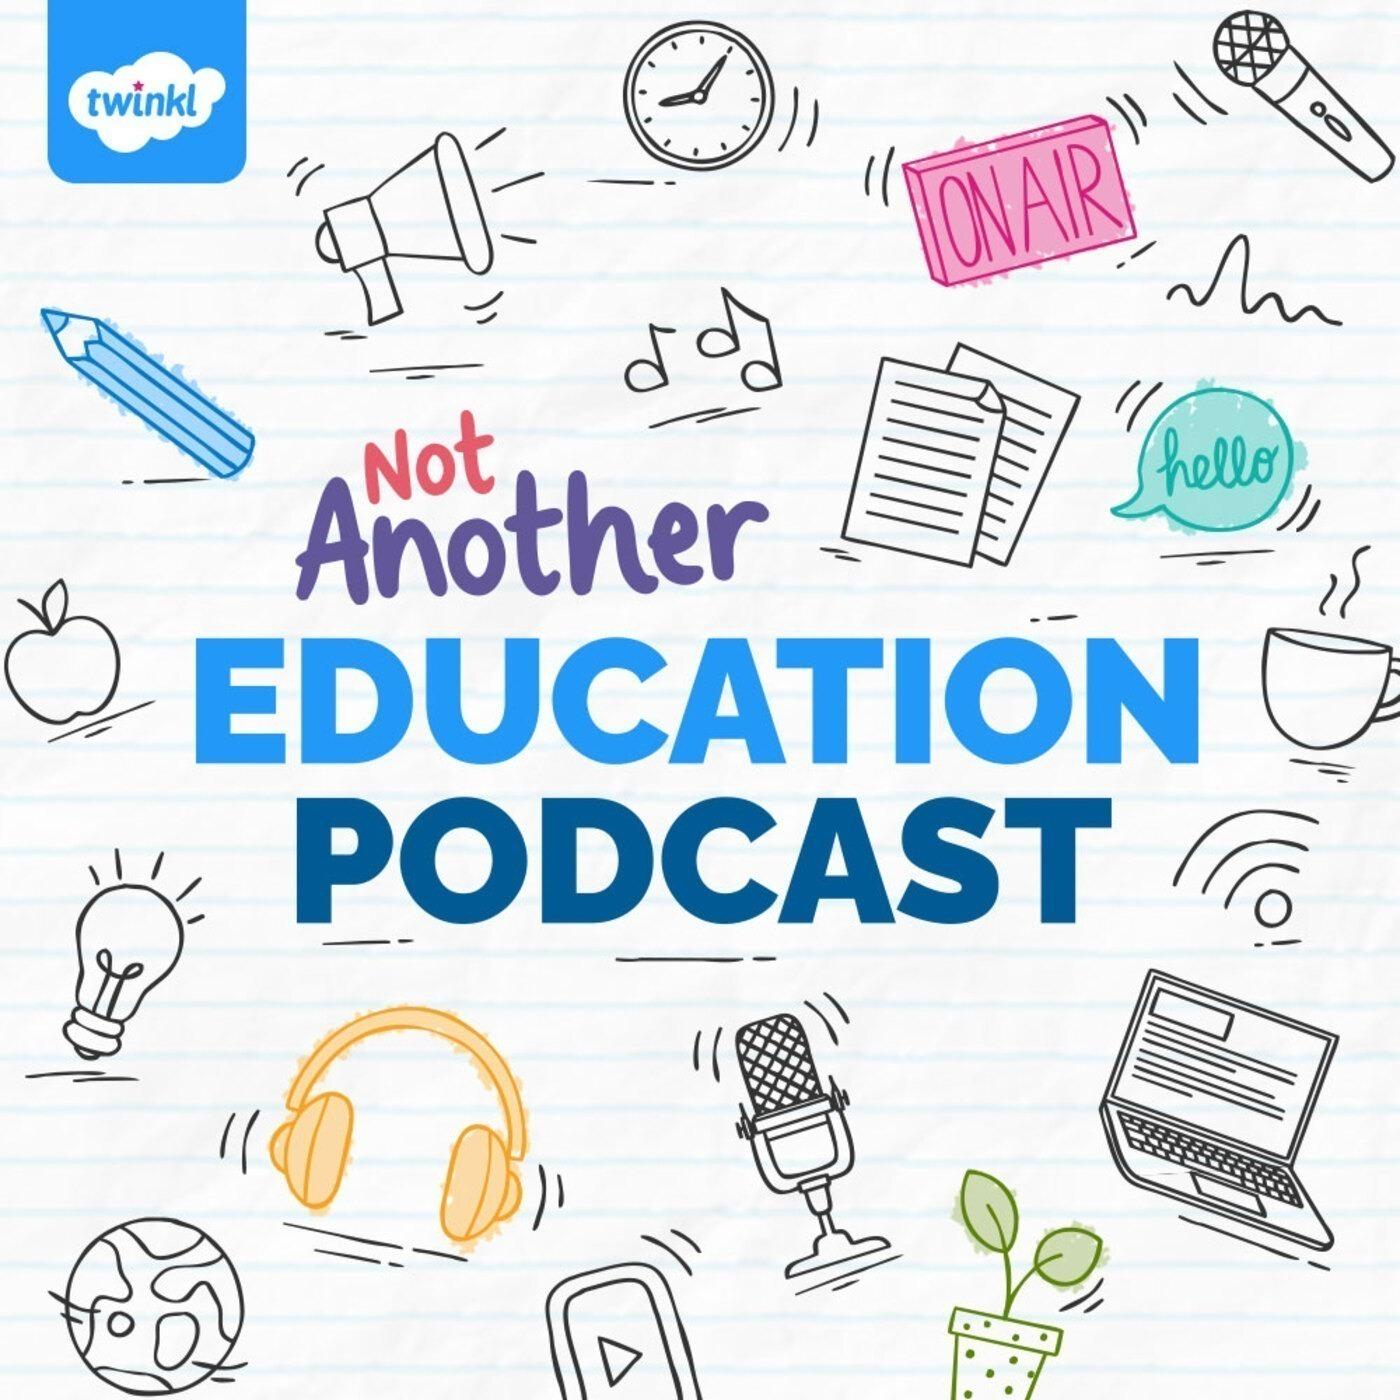 Not Another Education Podcast